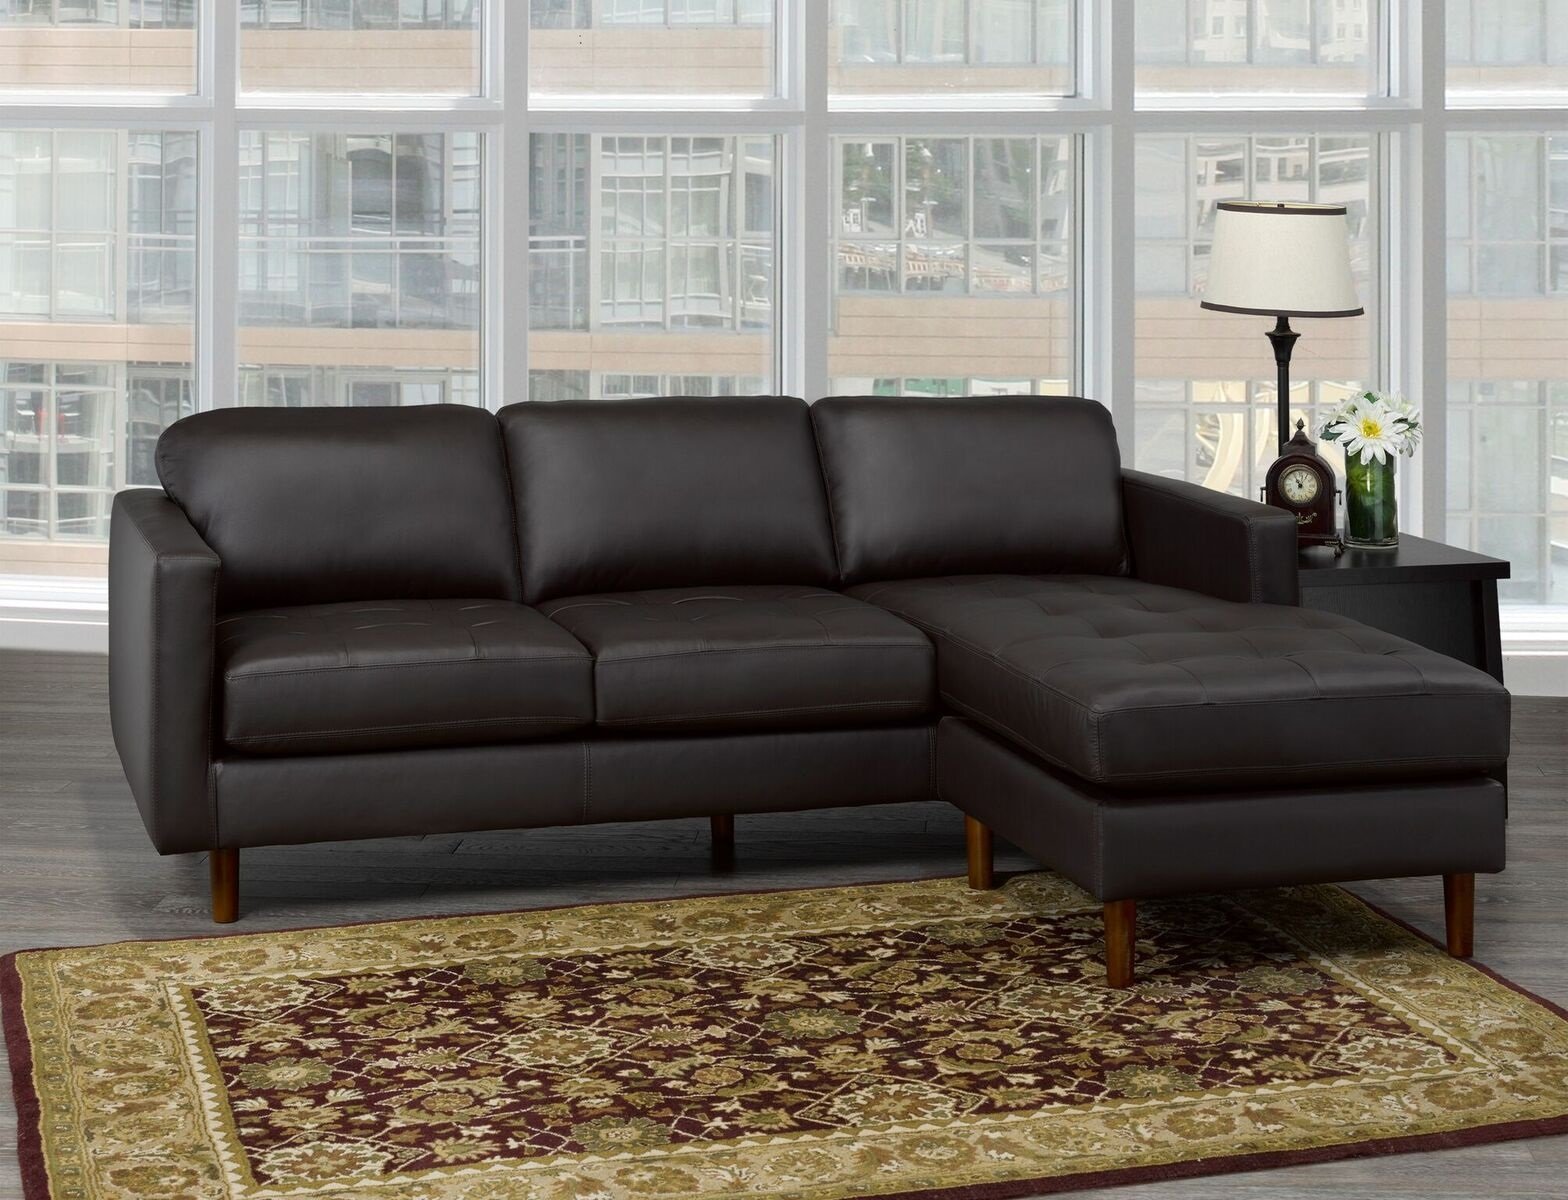 Berkeley Sectional - Chocolate Leather - Canadian Furniture